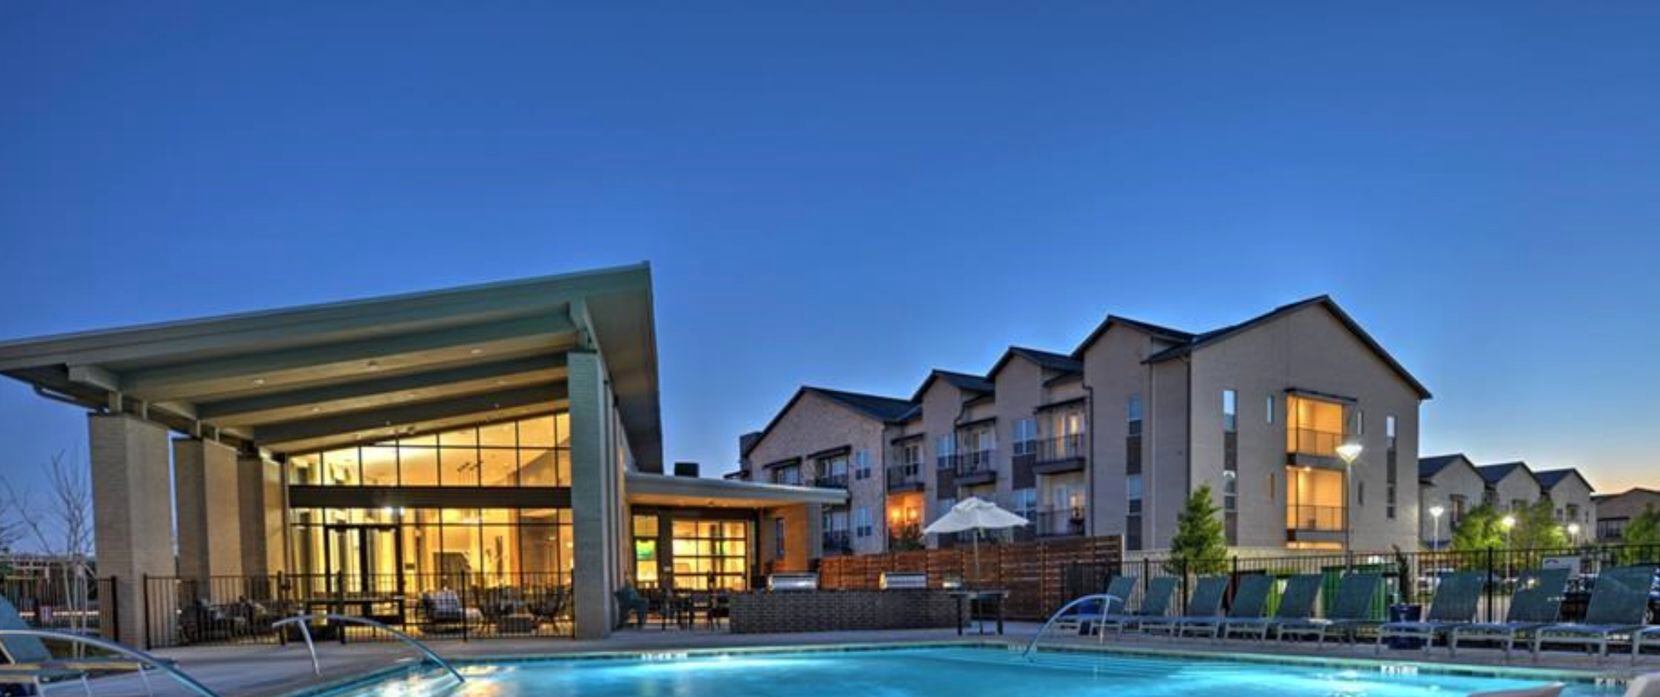 Excelsa Properties purchased the Aspen at Mercer Crossing, apartments  in Farmers Branch.